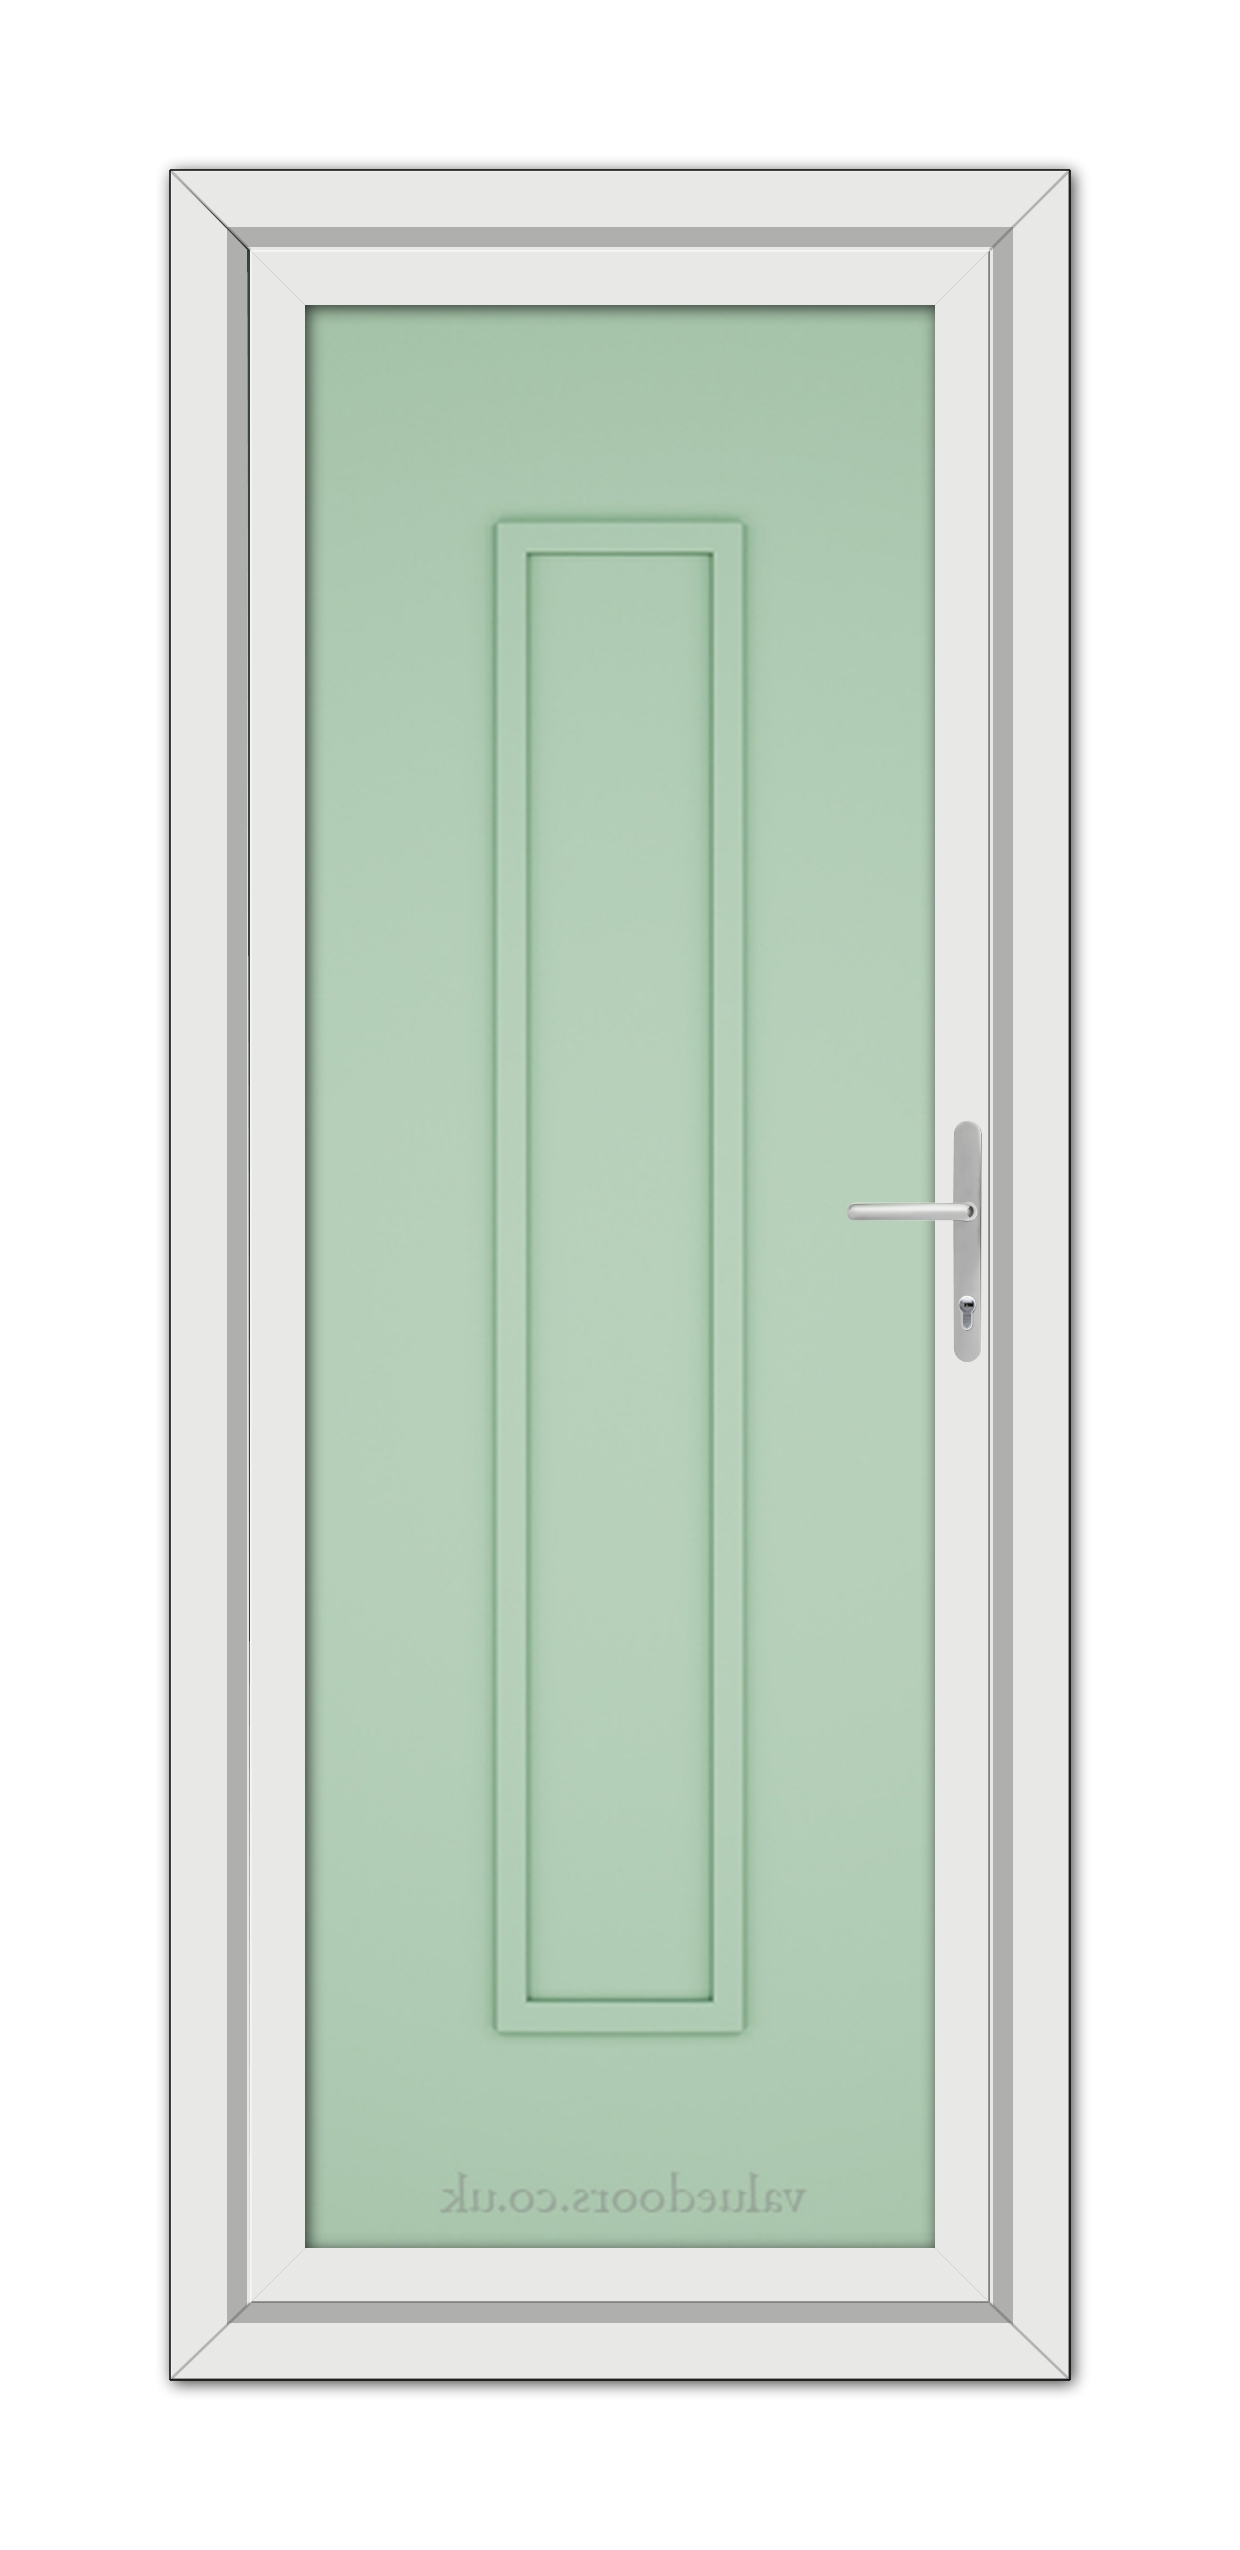 A vertical image of a Chartwell Green Modern 5101 Solid uPVC Door with a white frame and a silver handle, viewed from the front.